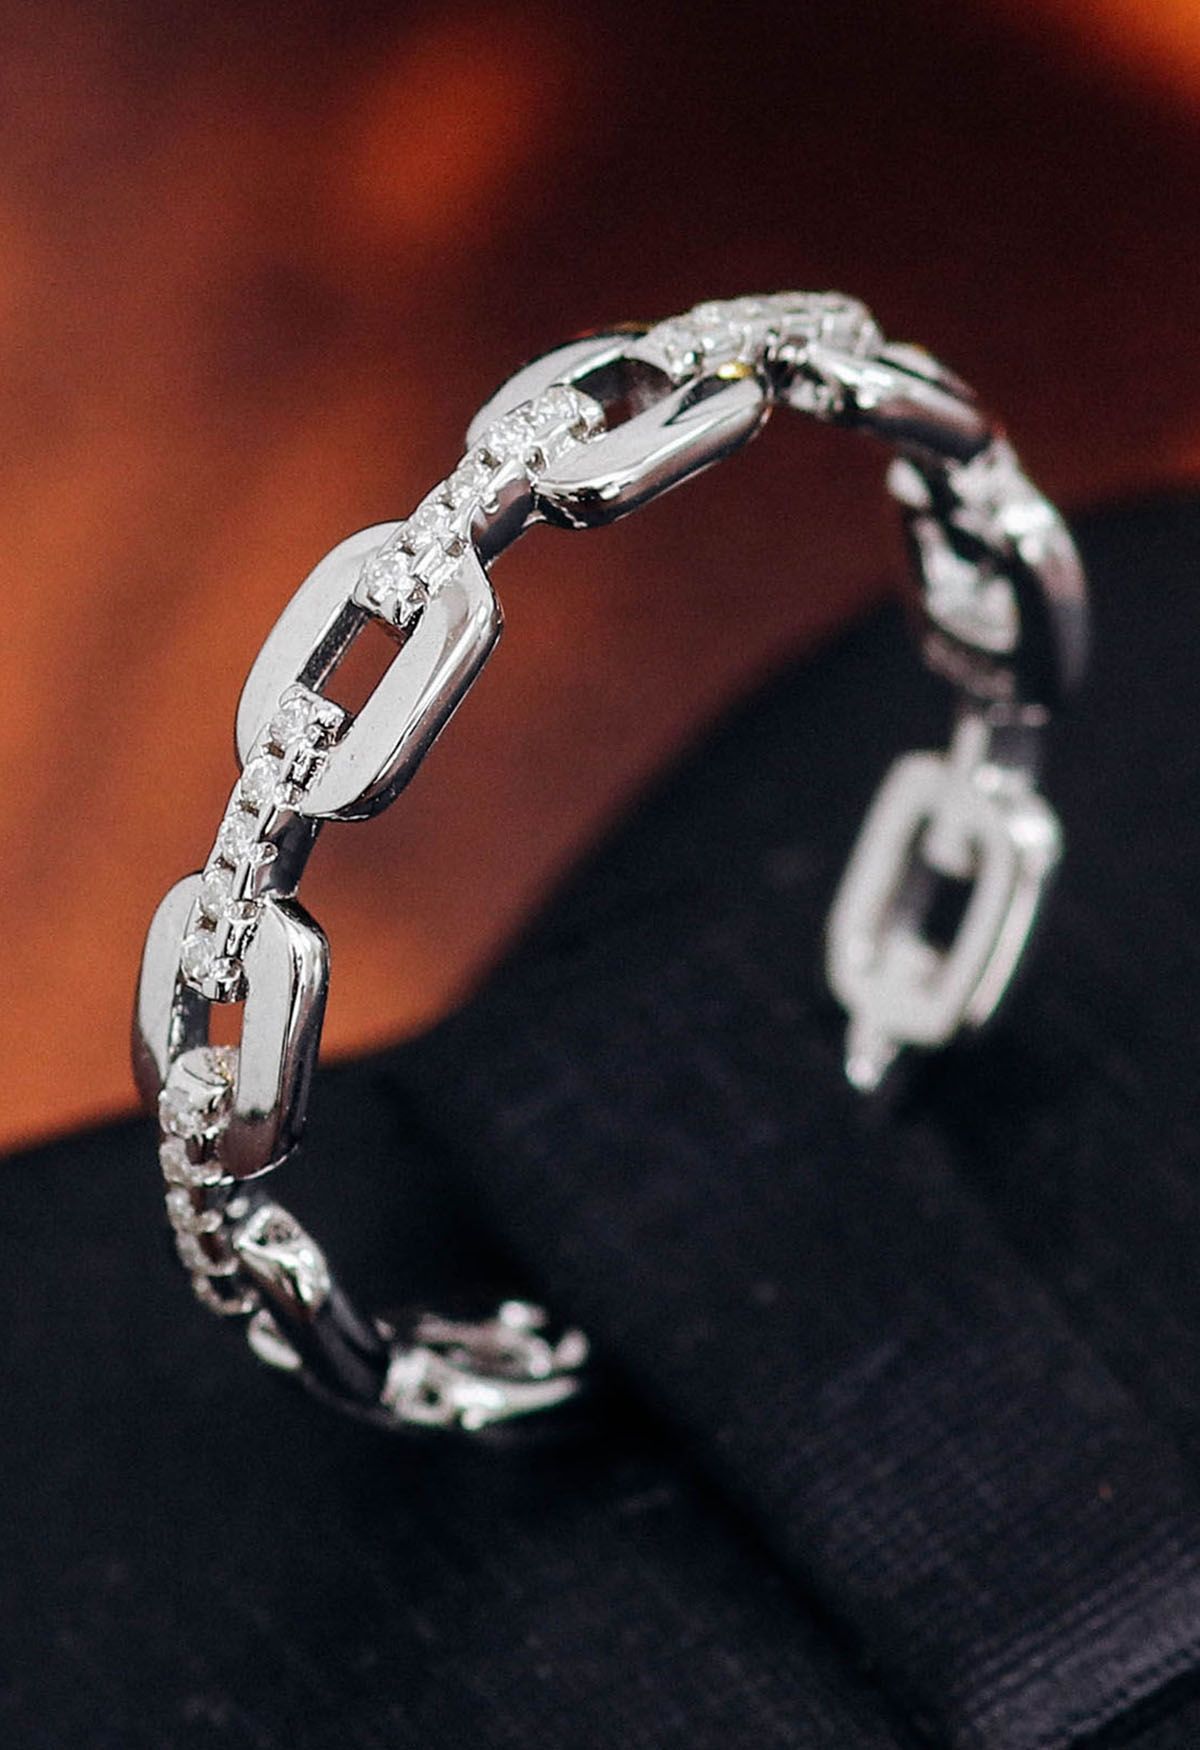 Connected Chain Moissanite Diamond Ring